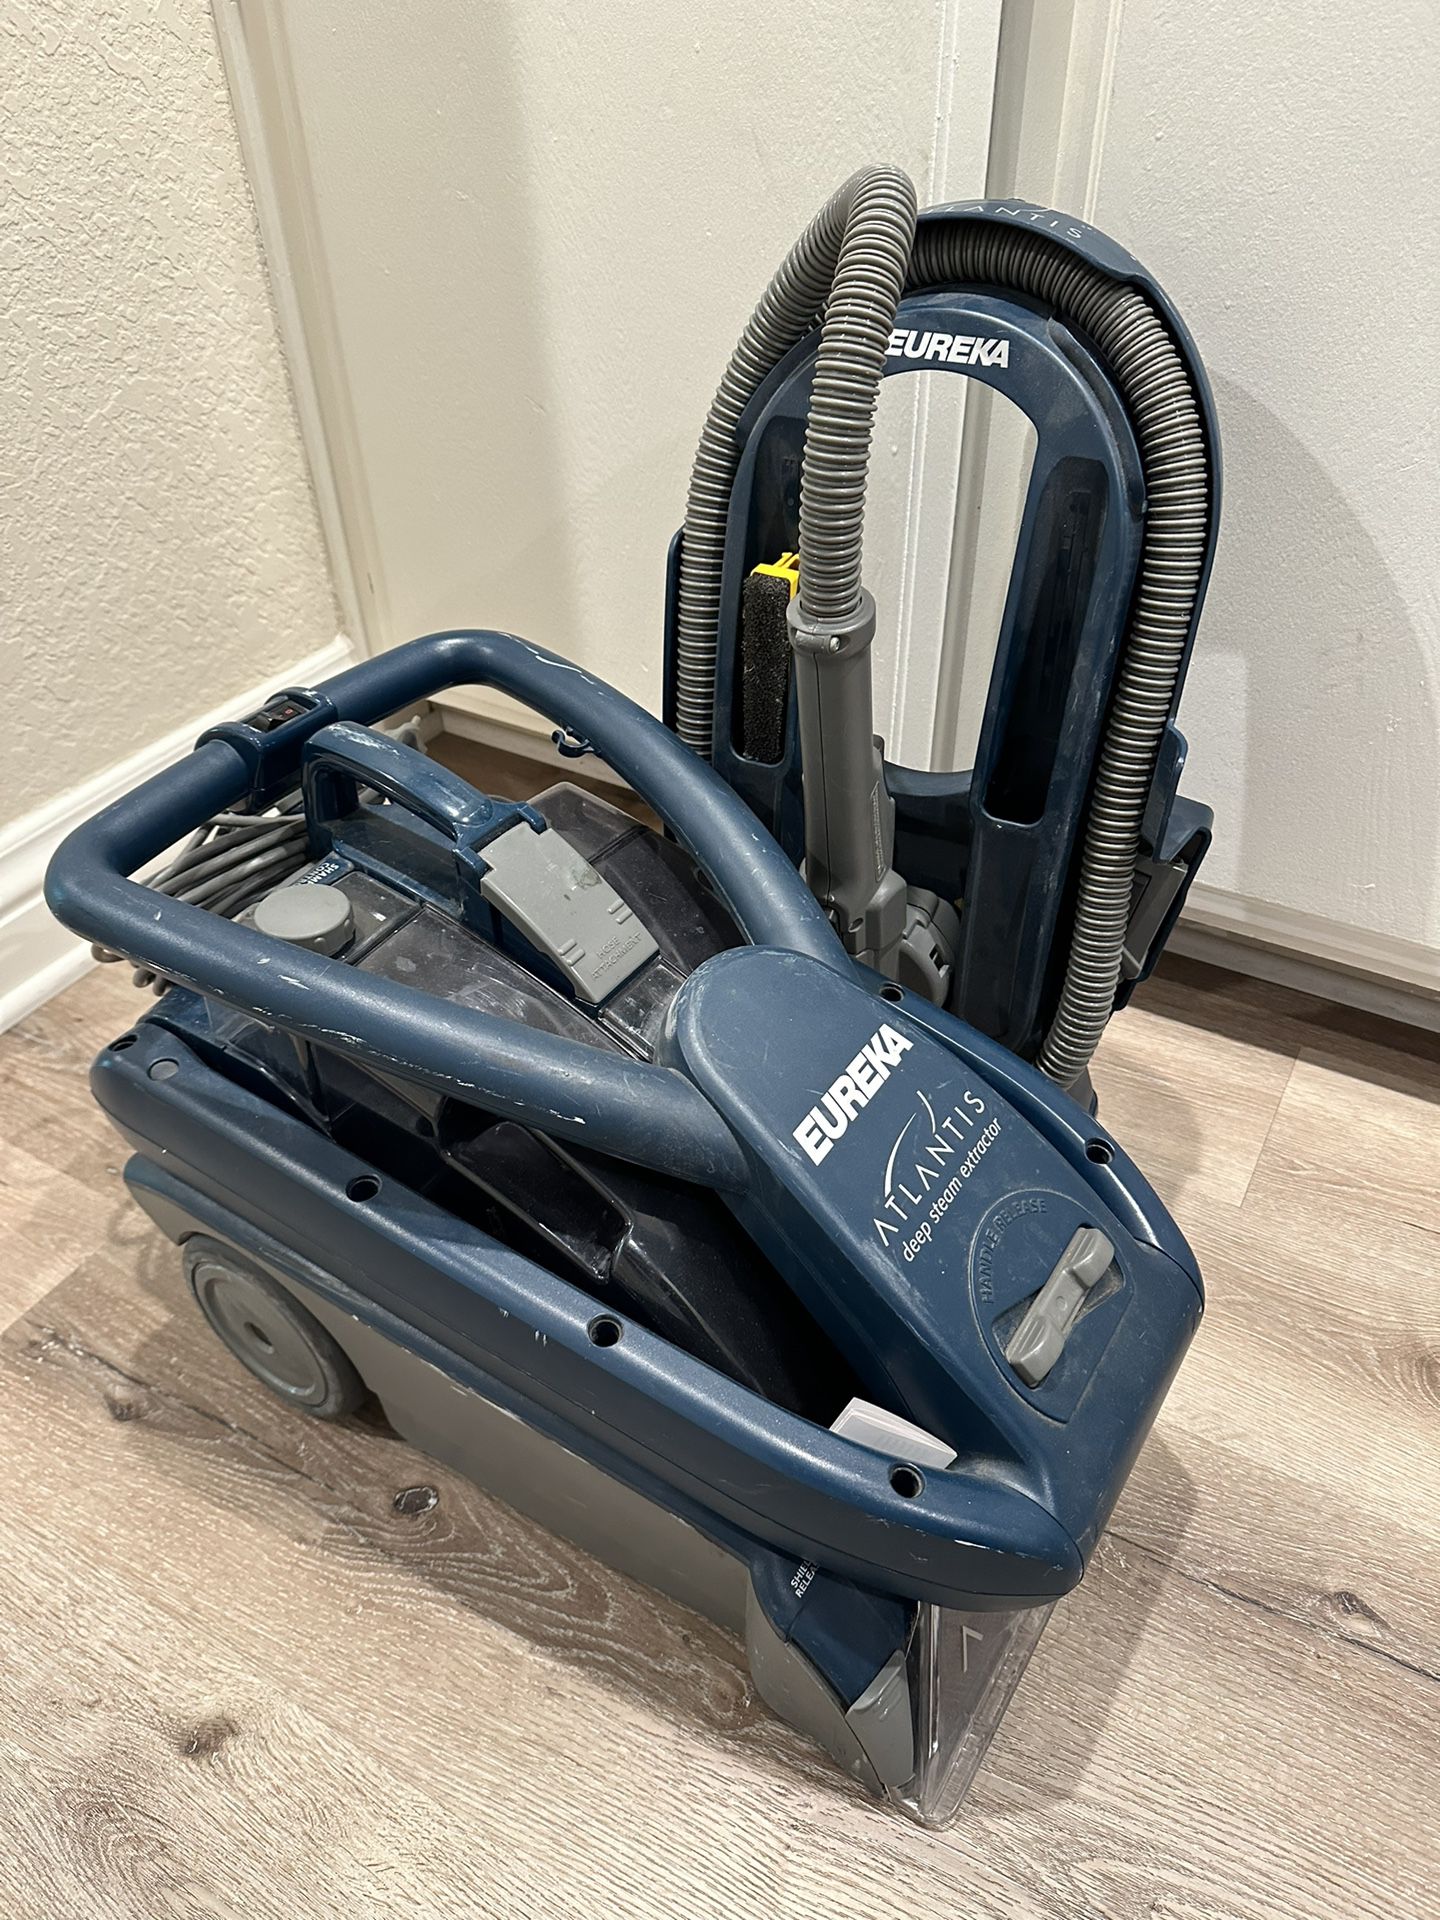 Carpet Steam Cleaner And Shampoo